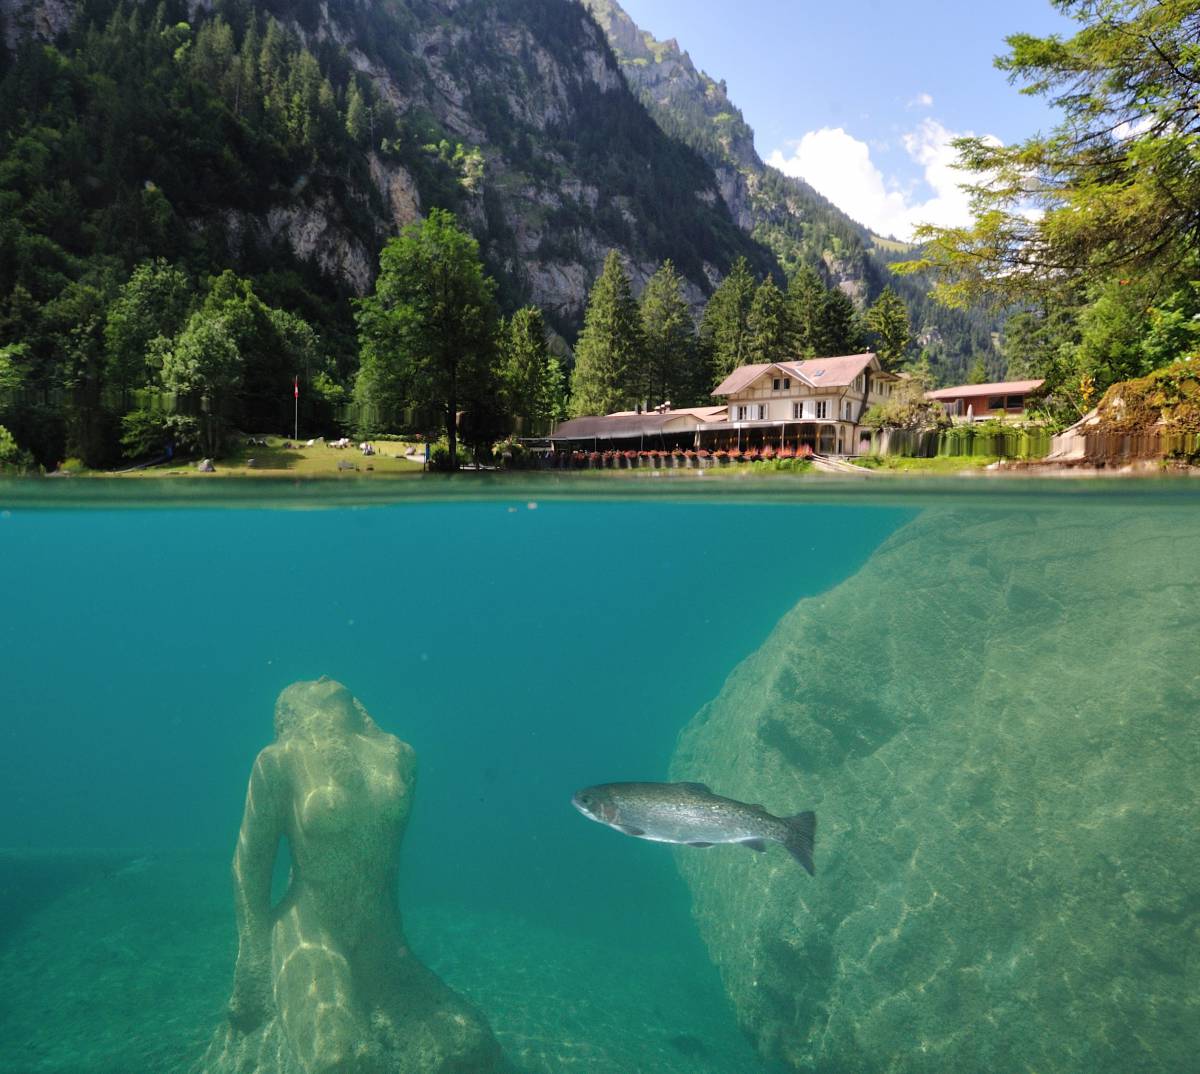  Blausee with trout, bistro in background